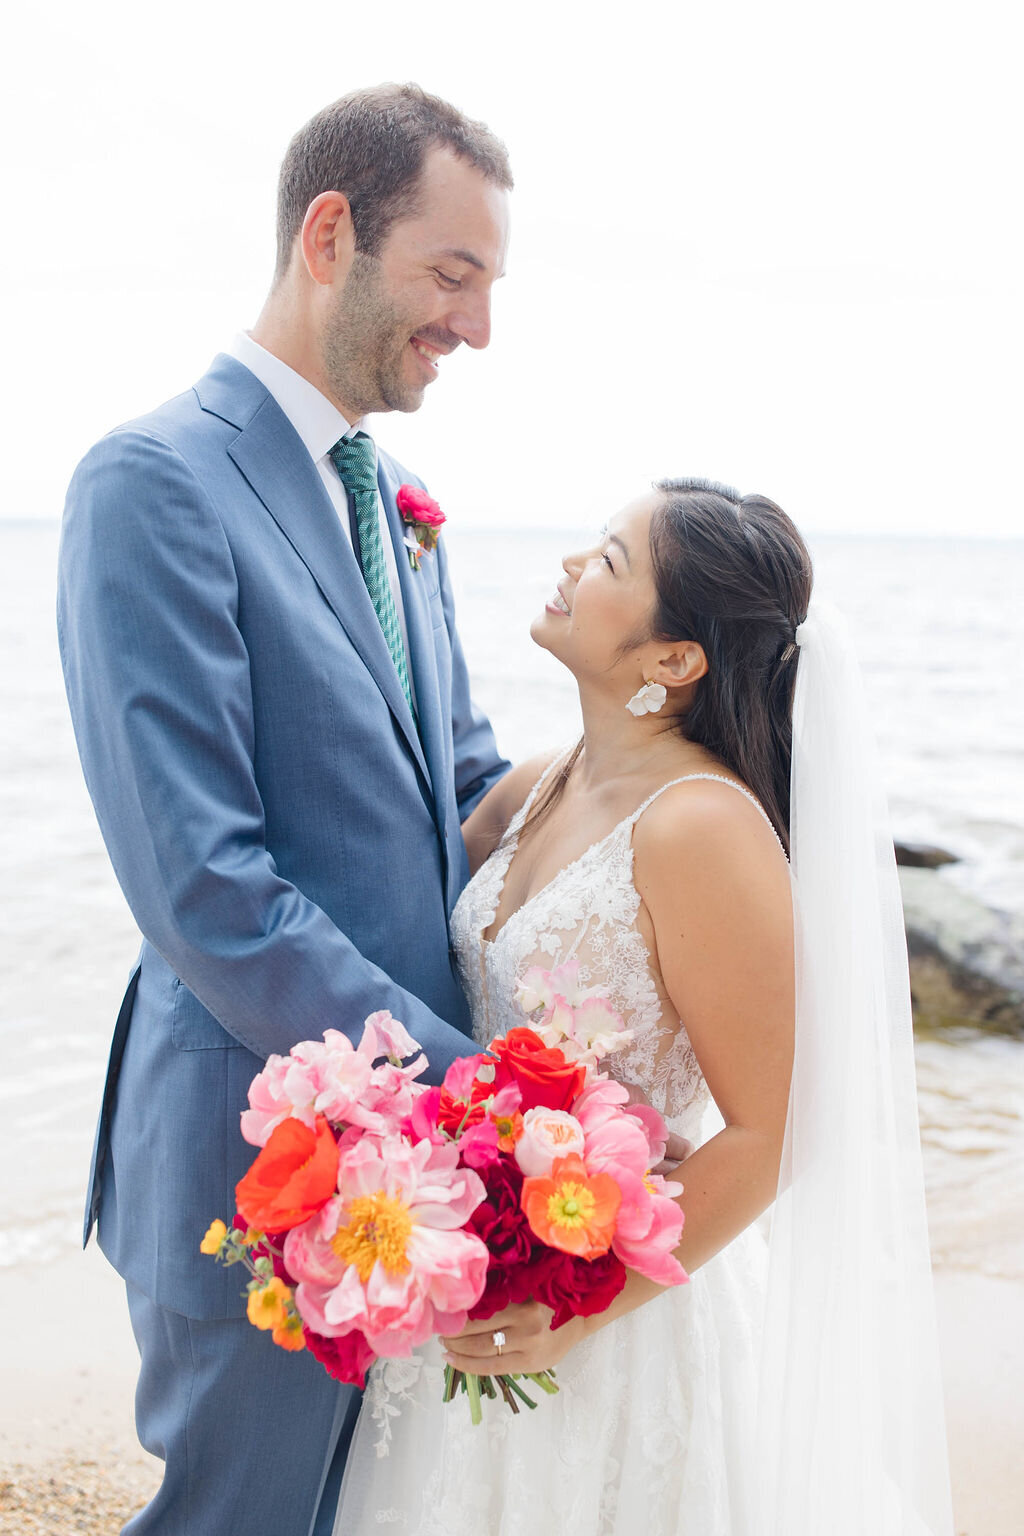 Couple smiling at each other with colorful floral bouquet